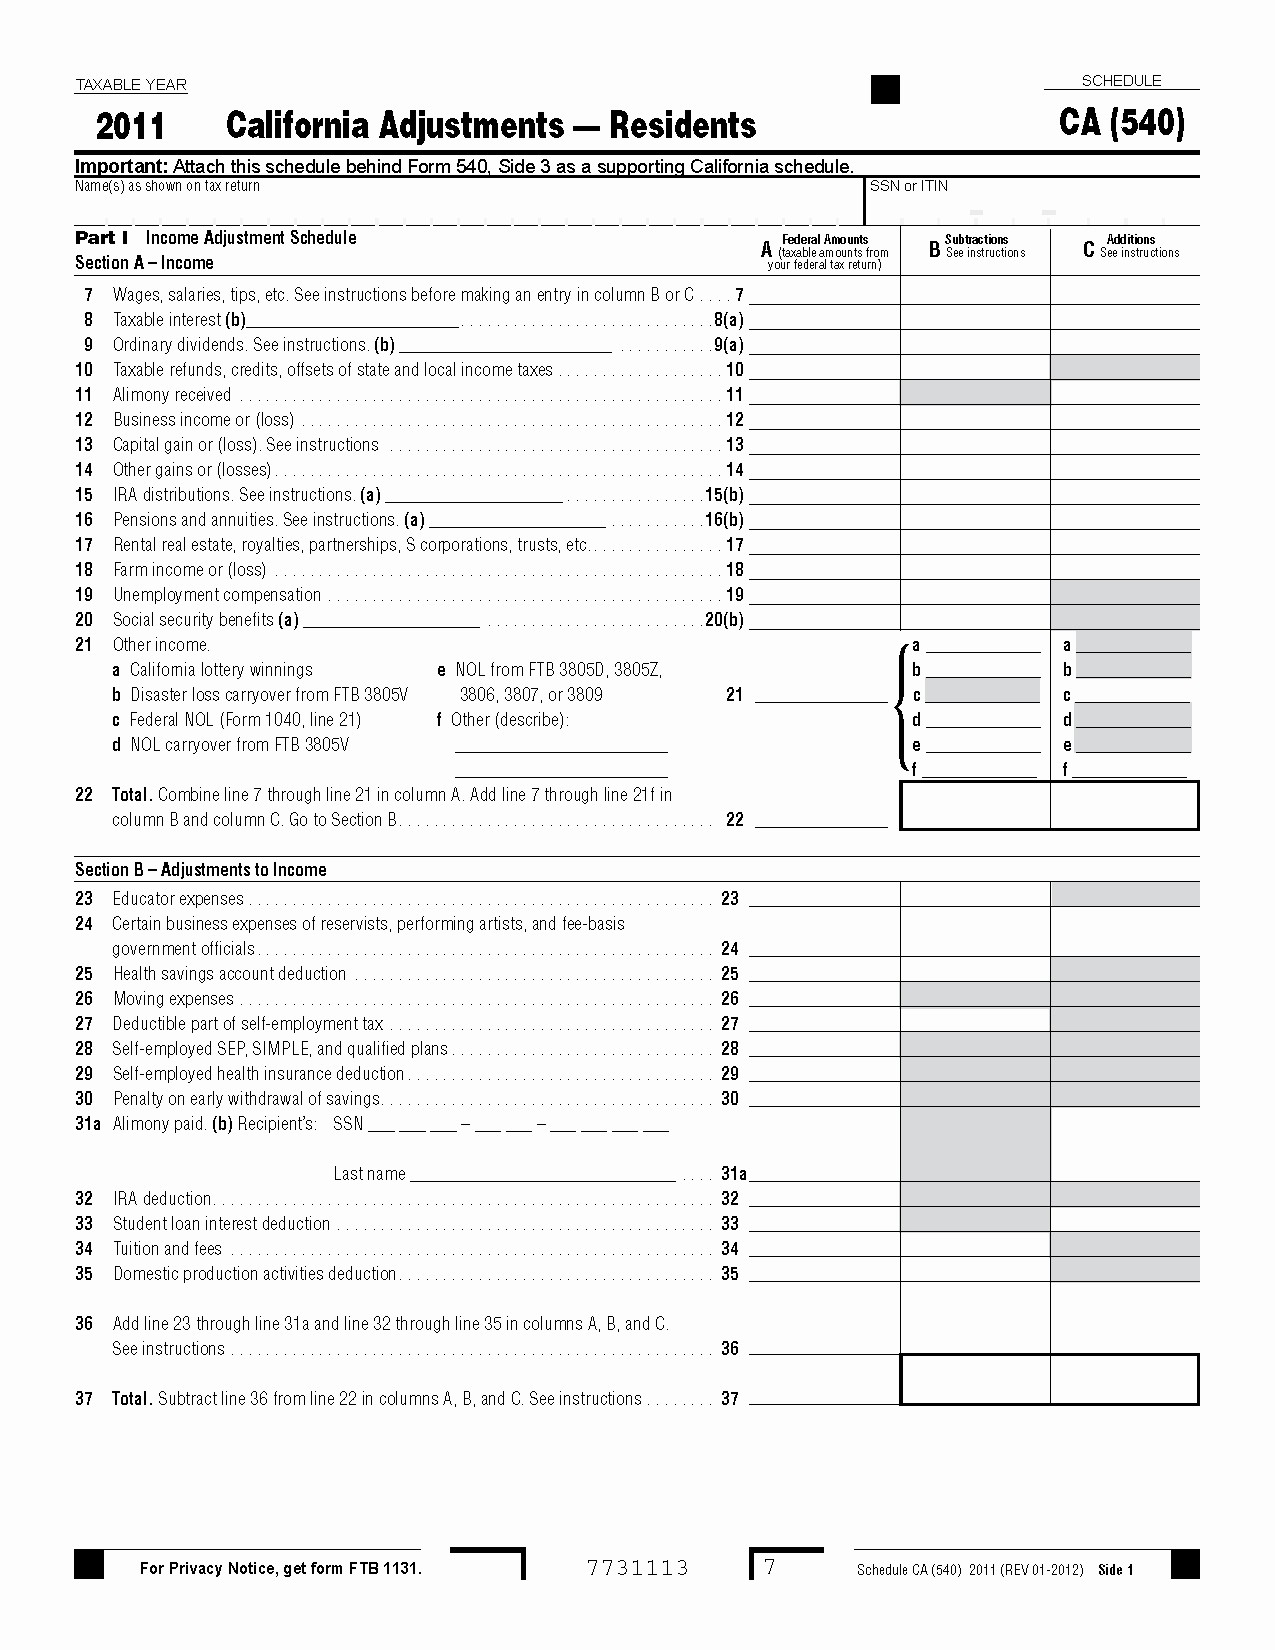 50 Awesome Irs Mileage Log Book Template DOCUMENTS IDEAS Document